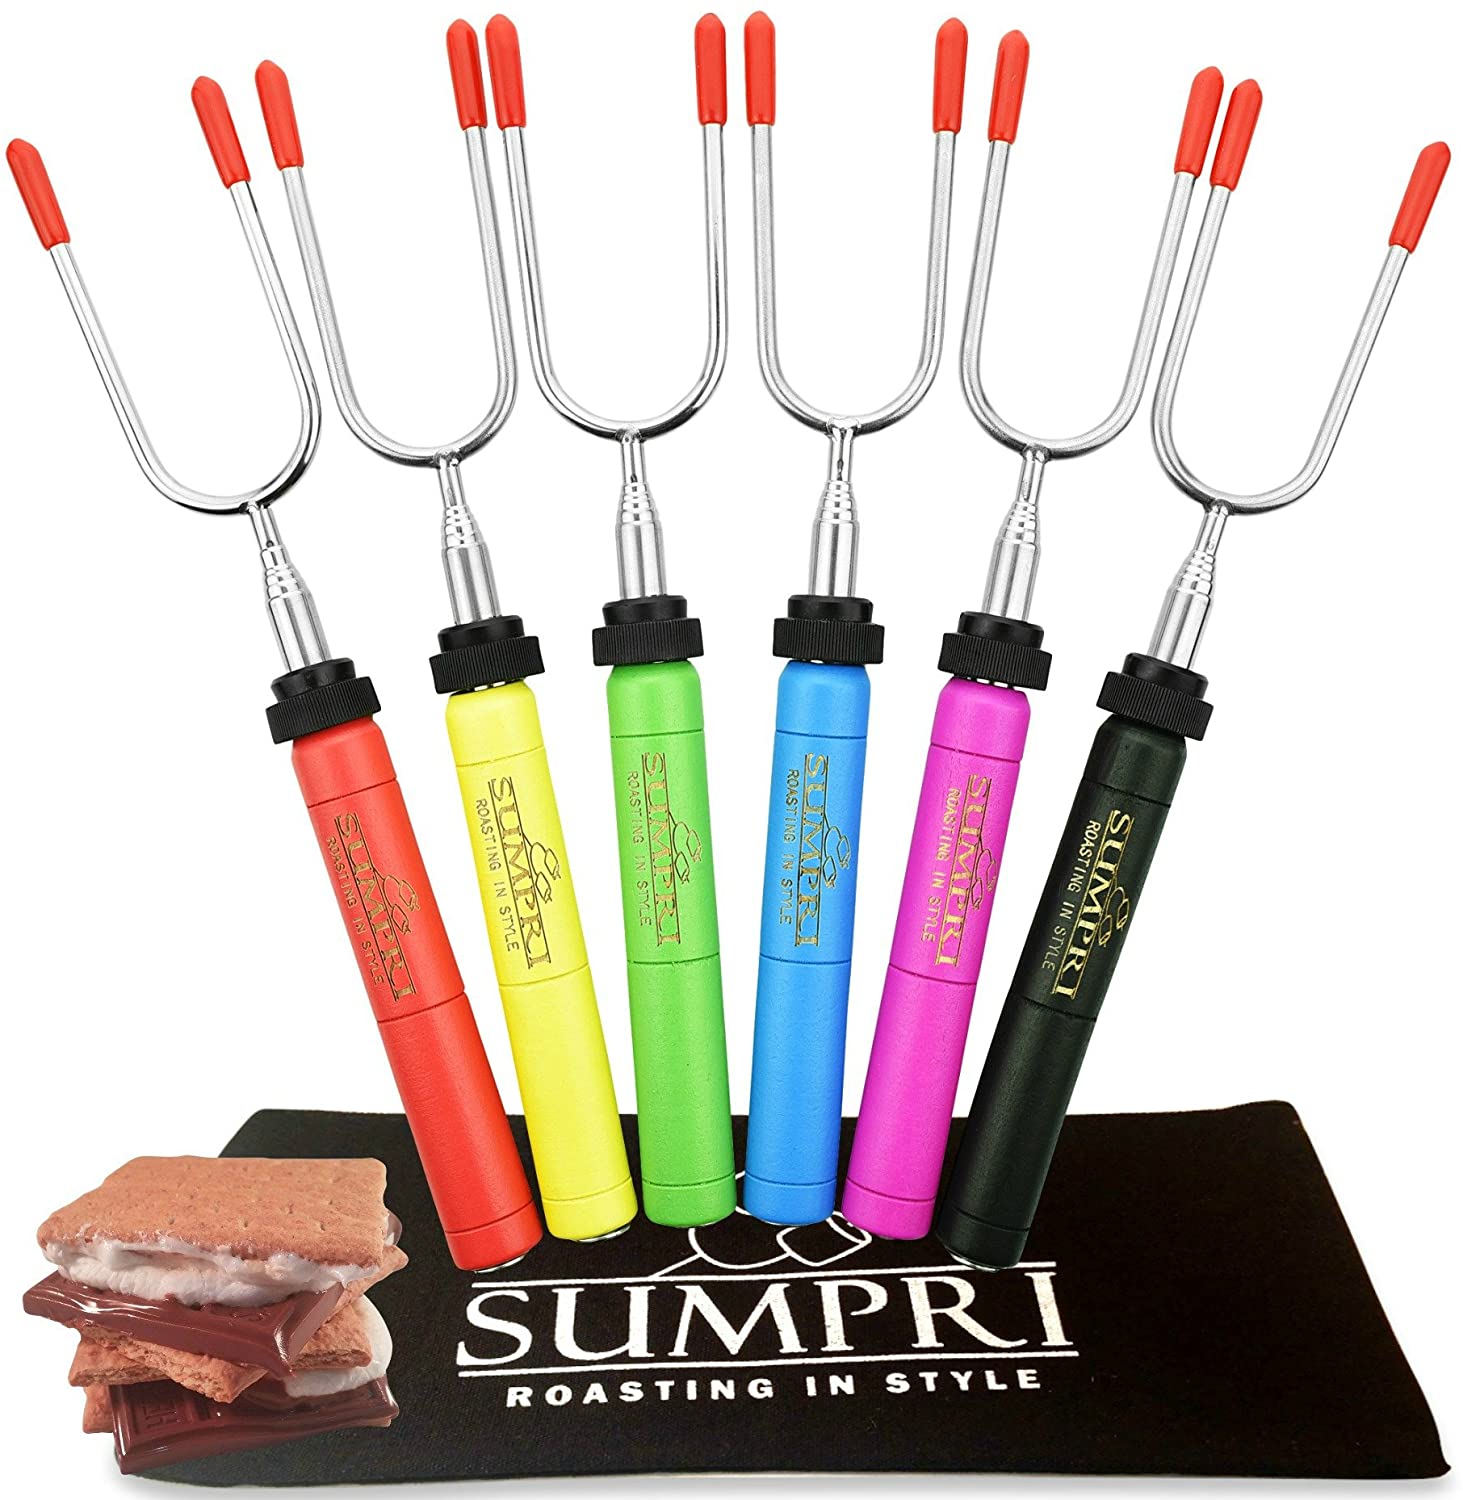 SUMPRI Marshmallow Roasting Sticks, smores Skewers TelescopSing Rotating Forks Set of 6 Hot Dog Fire Pit Outdoor Fireplace Campfire Accessories-6 Multicolored 34 Inch Extendable Steel Fork Camping Kit